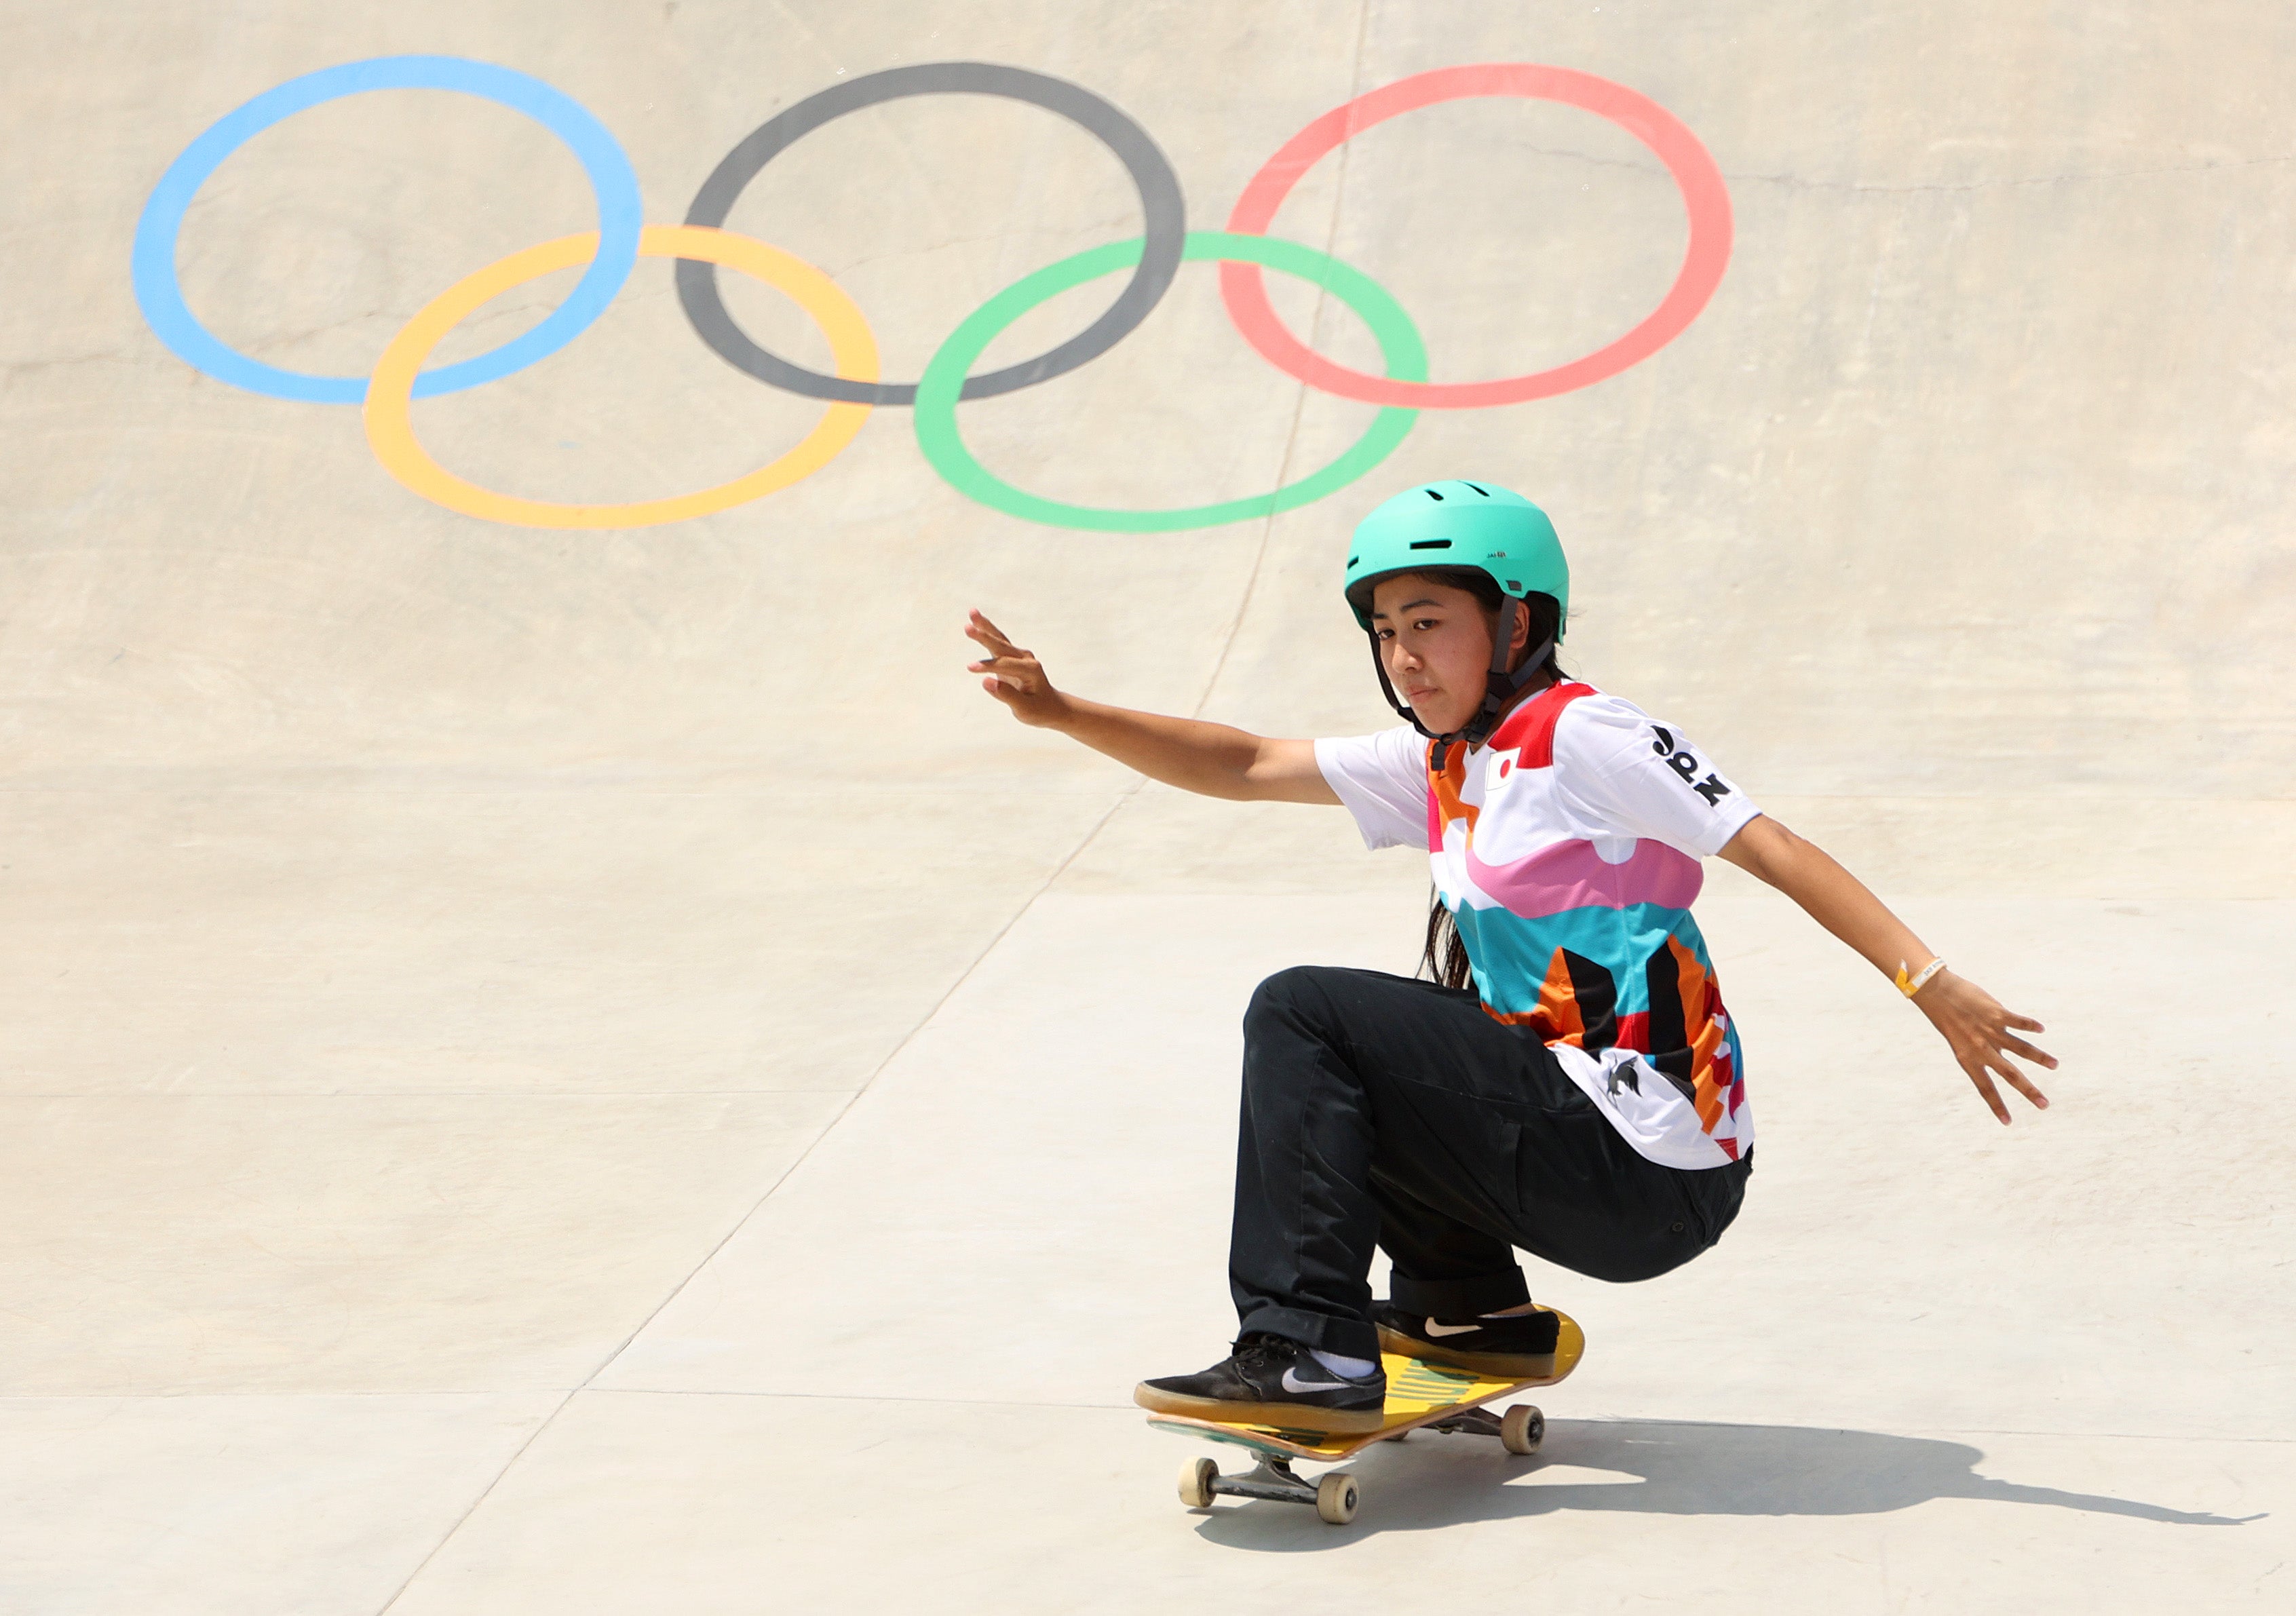 Olympics Skateboarding Schedule When Will Sky Brown Perform? Skate